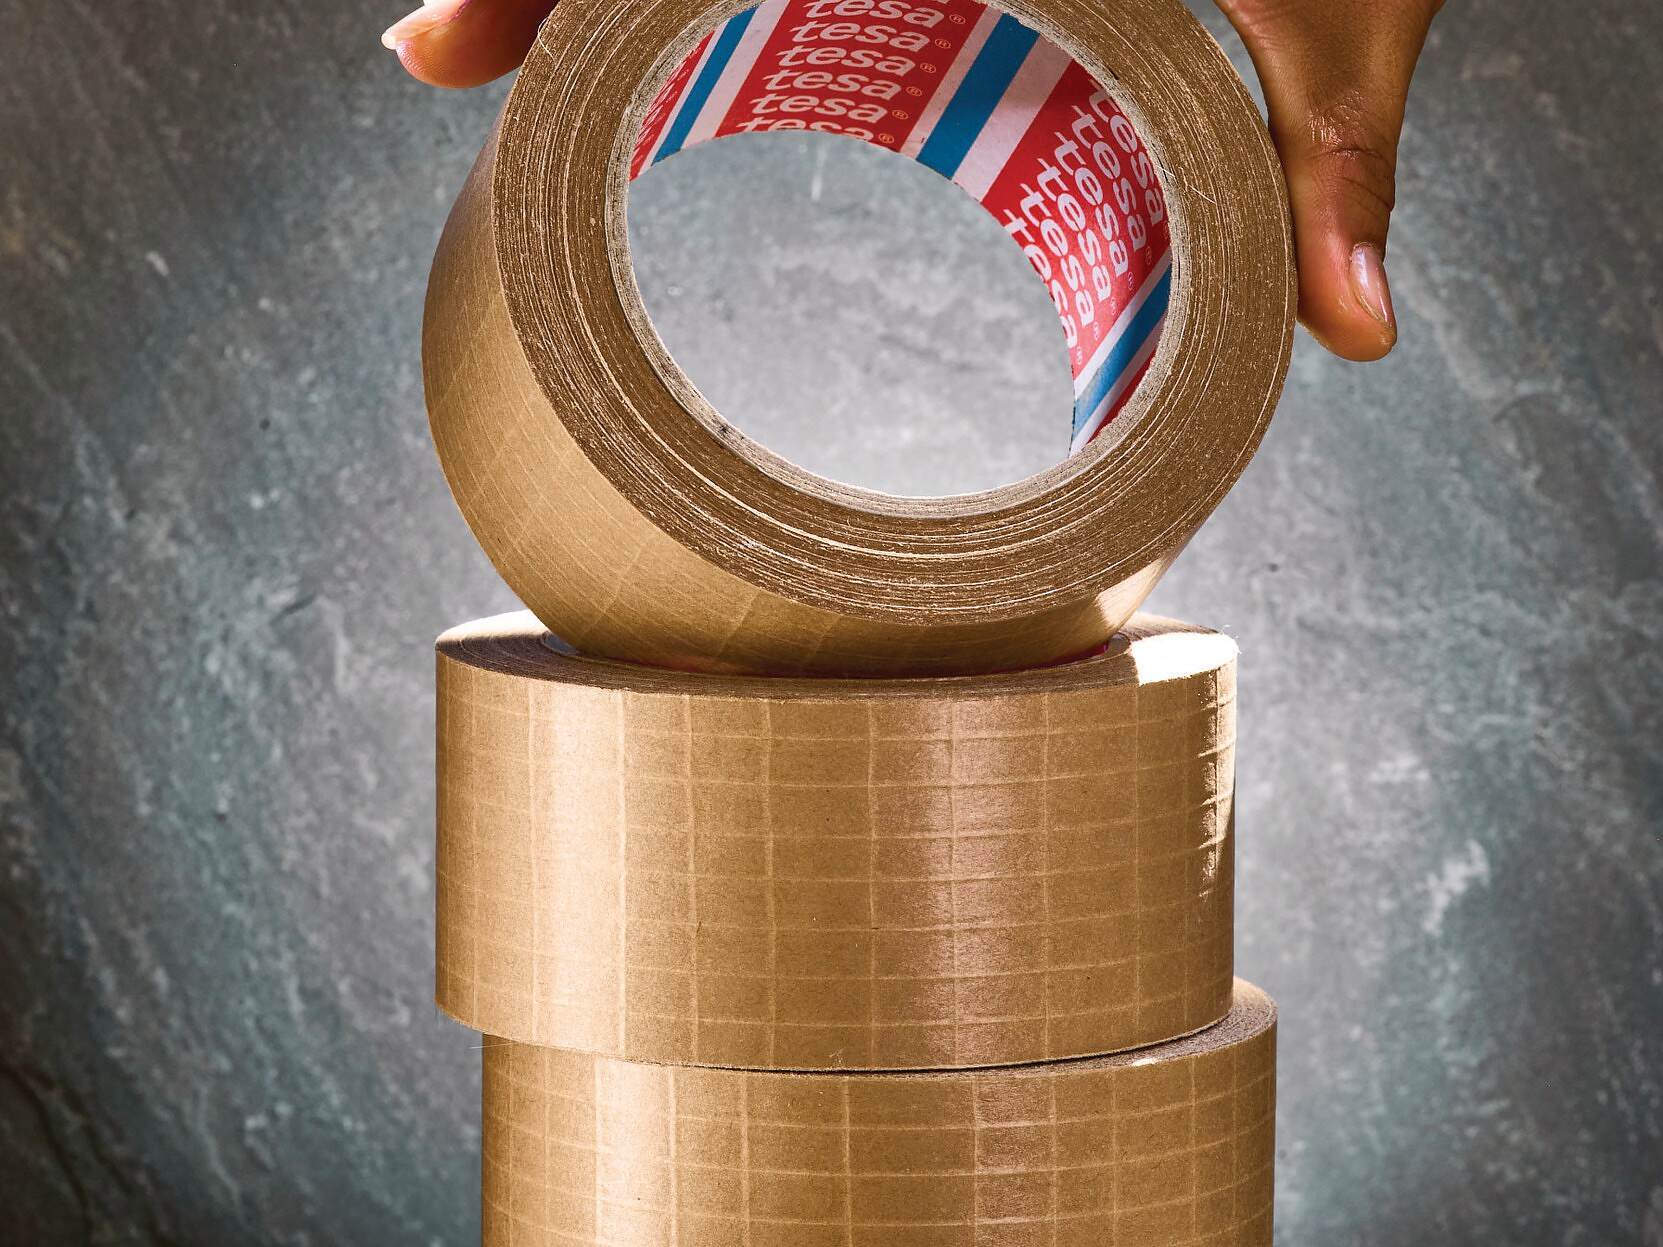 Tape for Tacks? Yes, Cardboard Tacking Tape! 